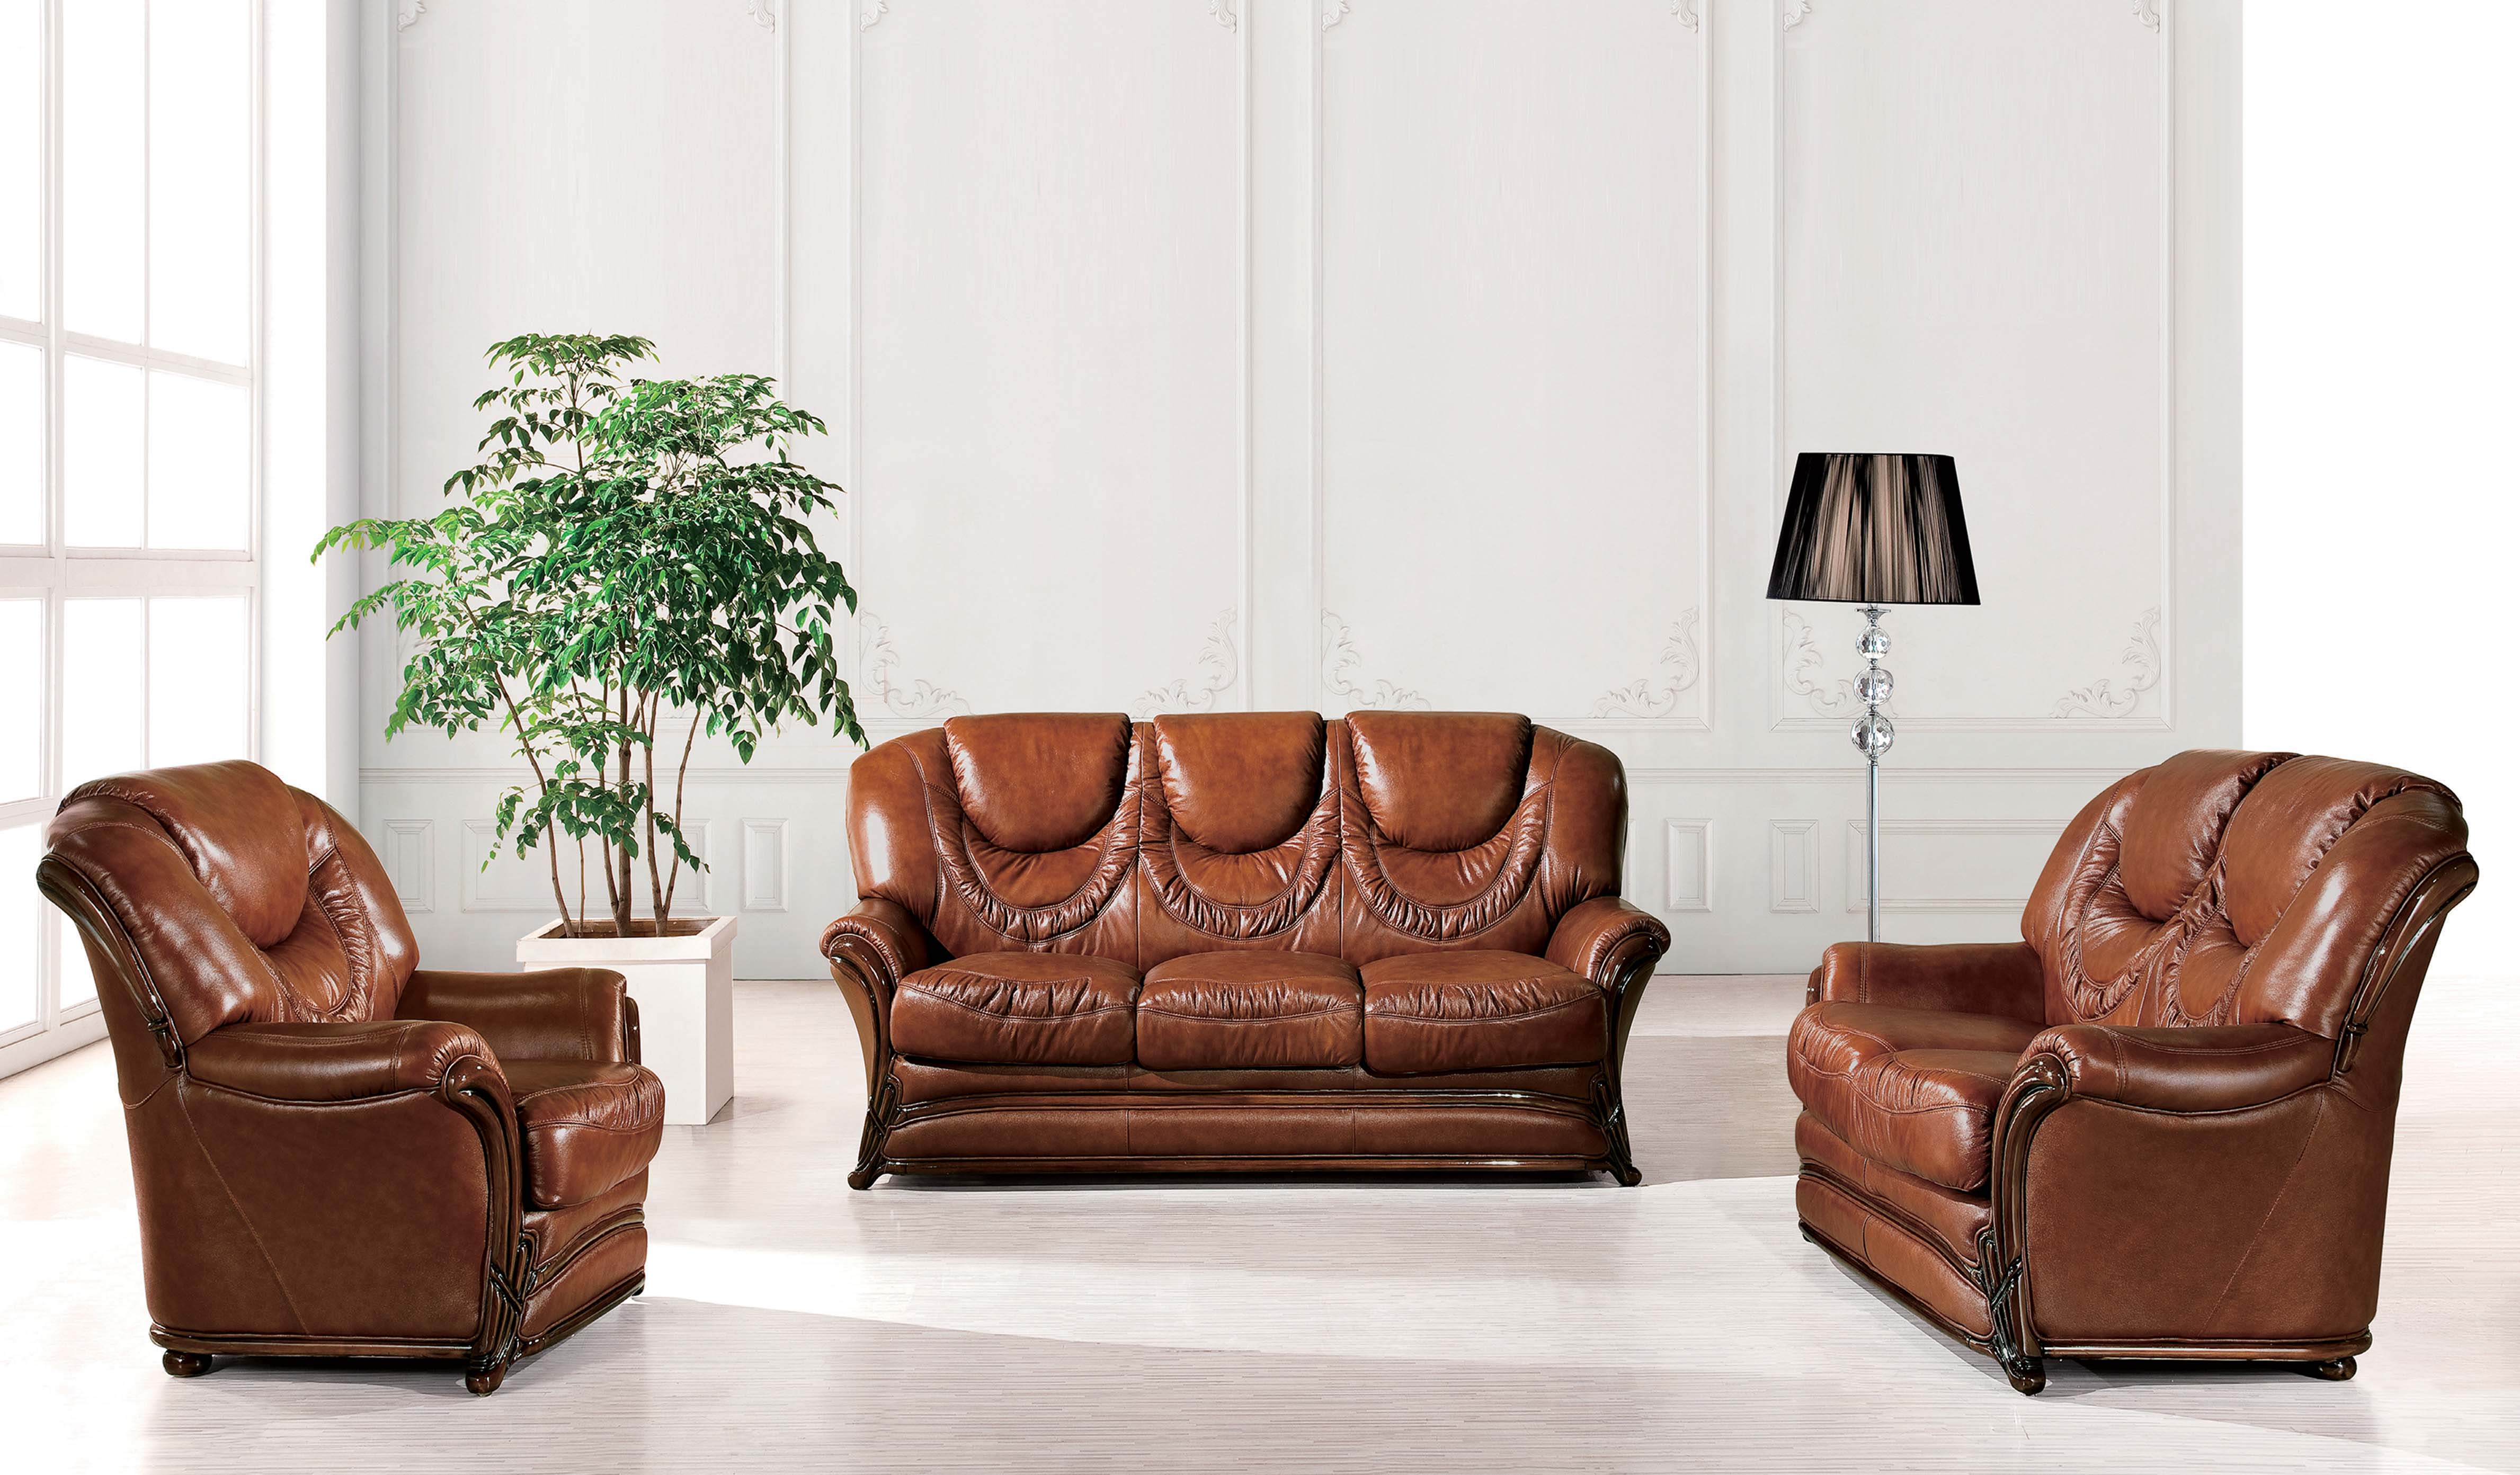 67 Full Leather, Sofas Loveseats and Chairs, Living Room Furniture